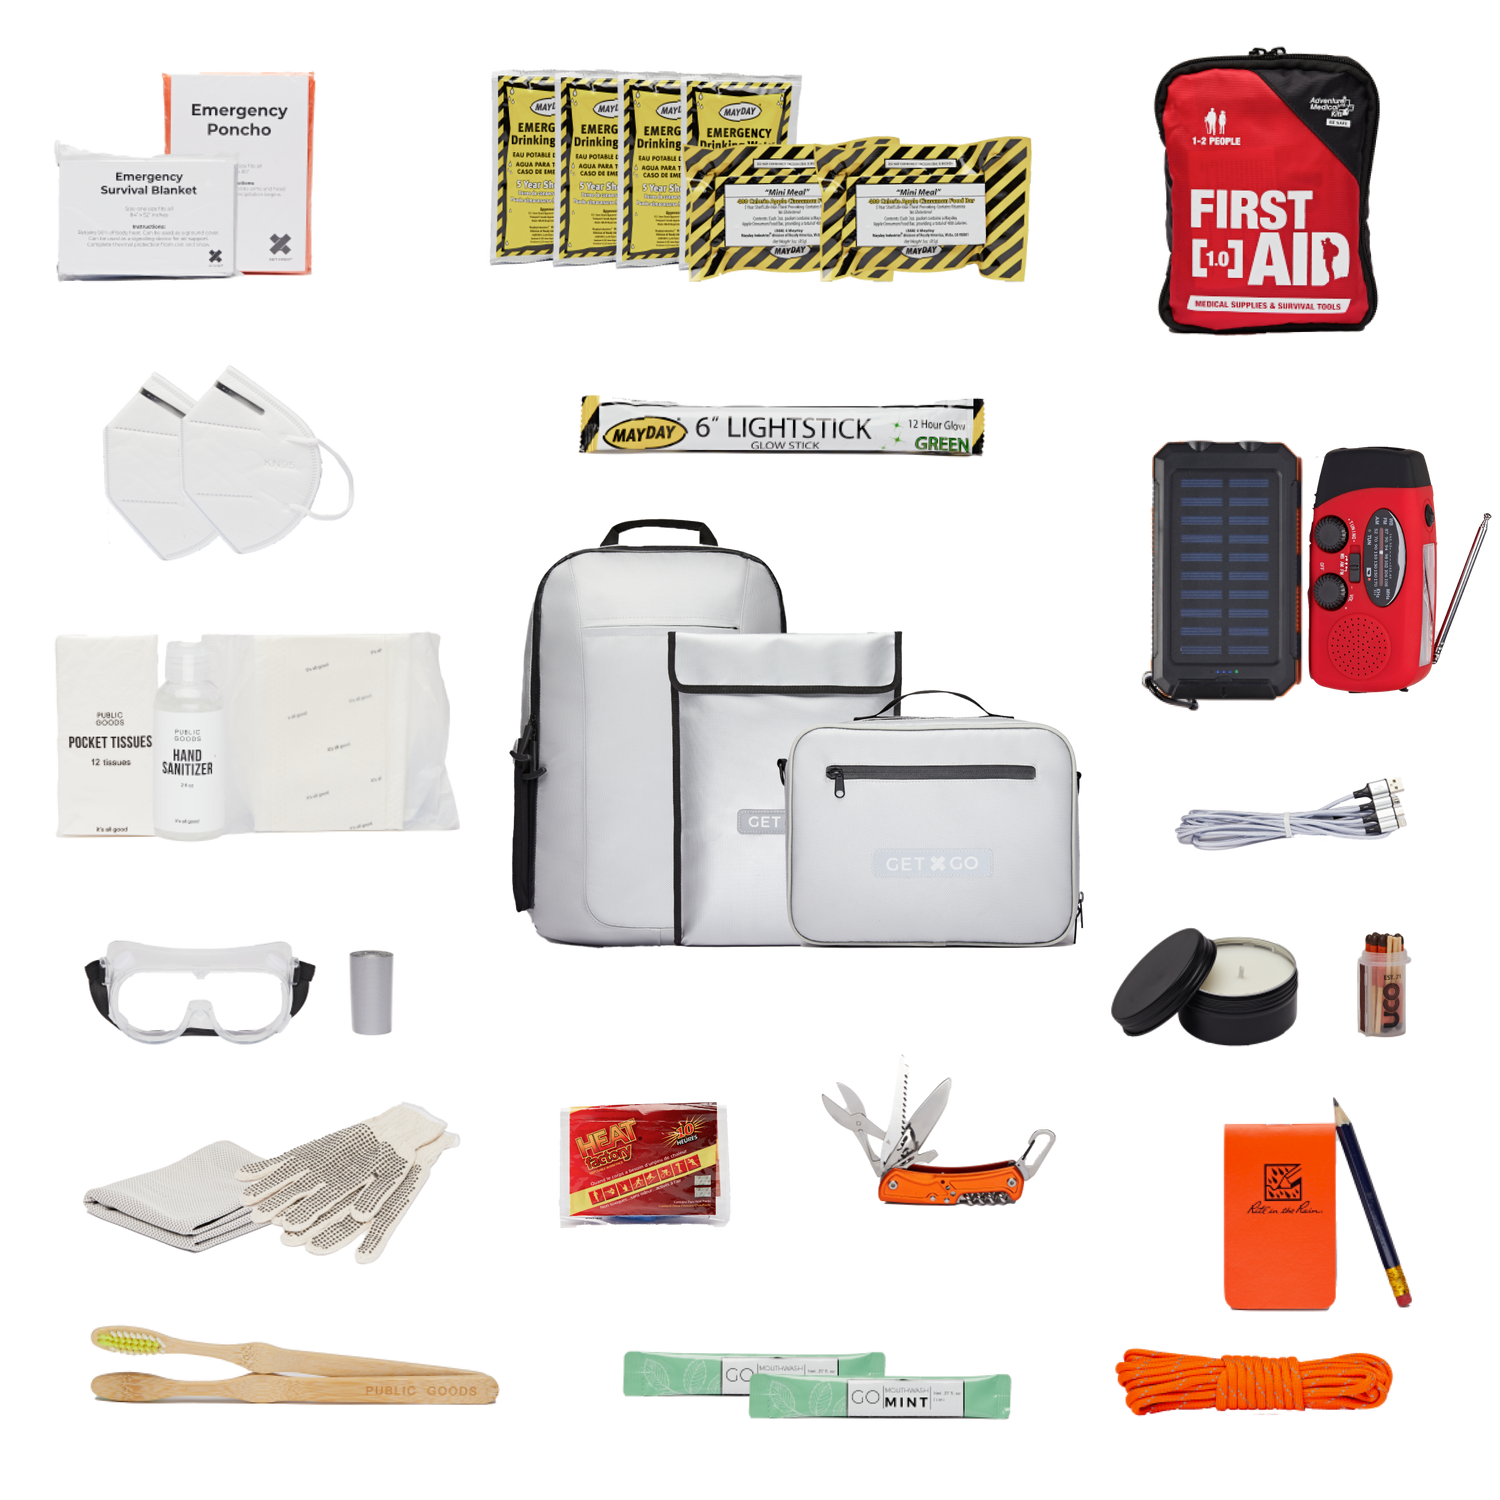 Survival Kit List - What goes in a Survival Kit?